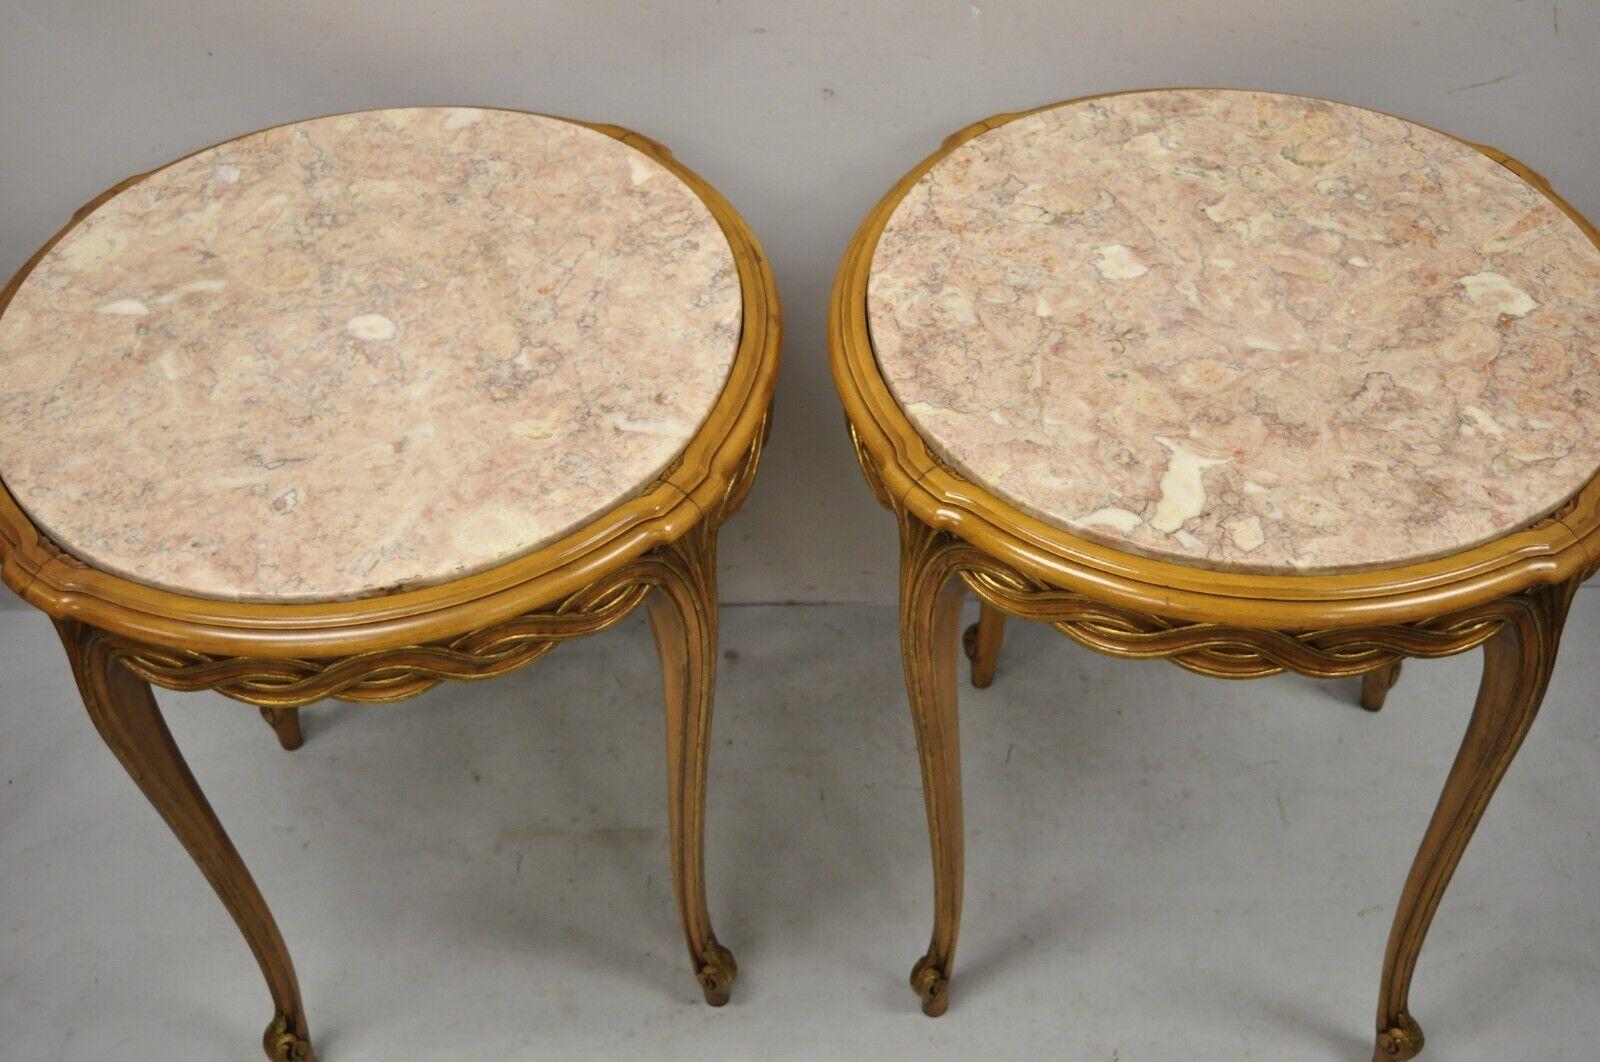 French Provincial Hollywood Regency Round Pink Marble Top Side Tables, a Pair For Sale 1